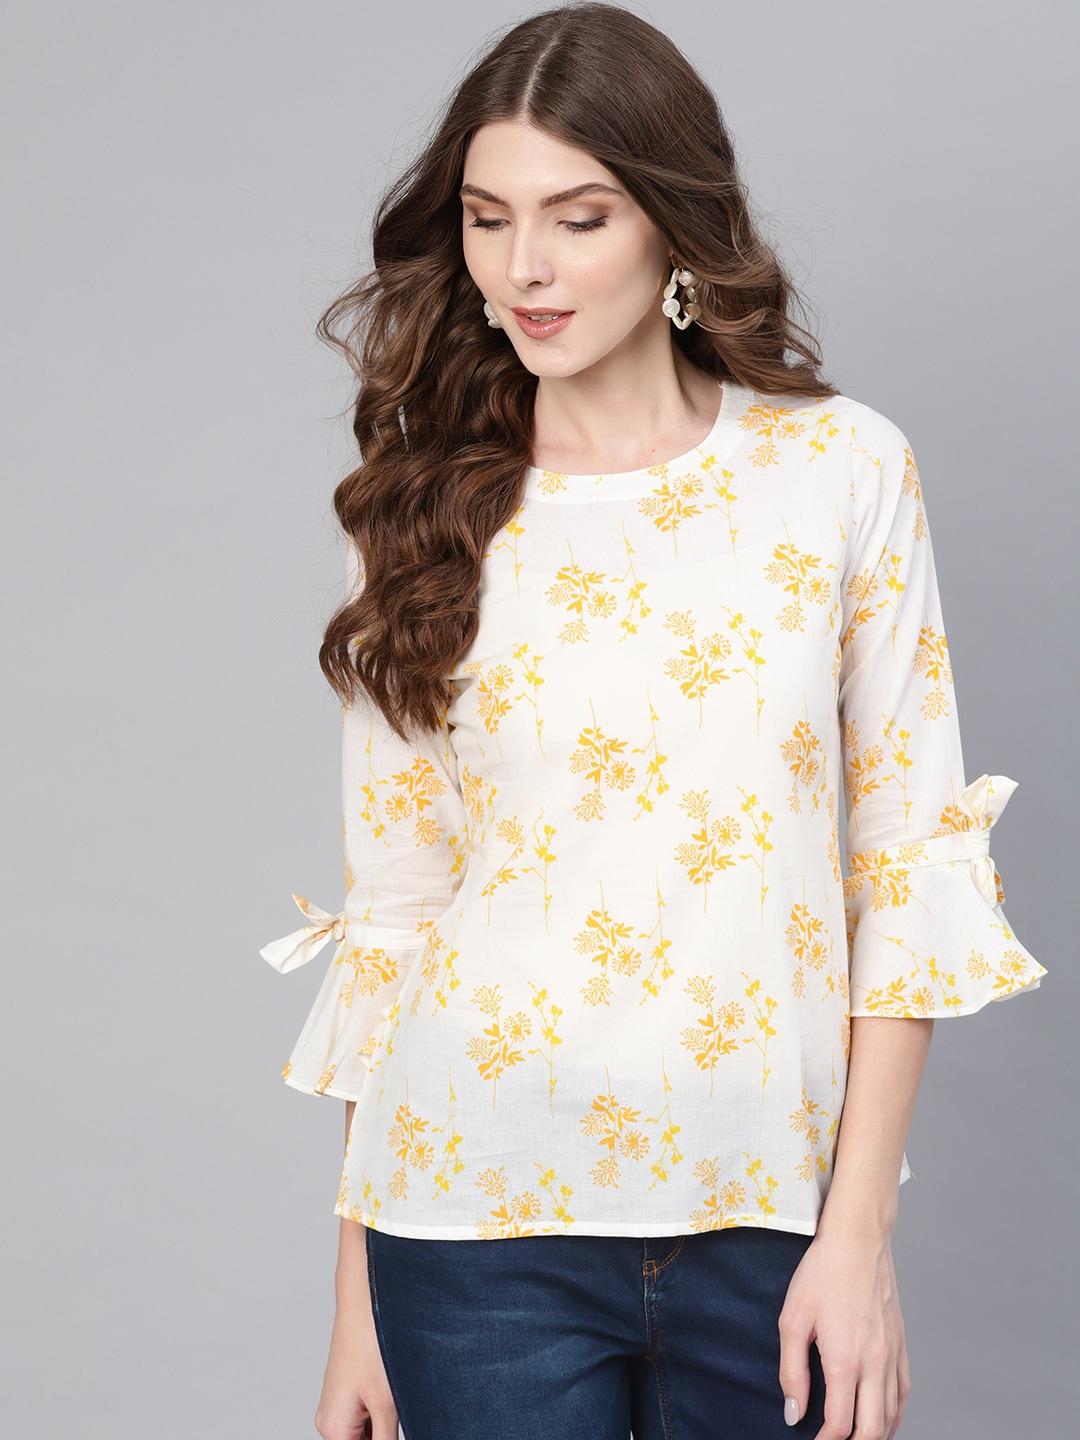 aasi - house of nayo women off-white & yellow printed top